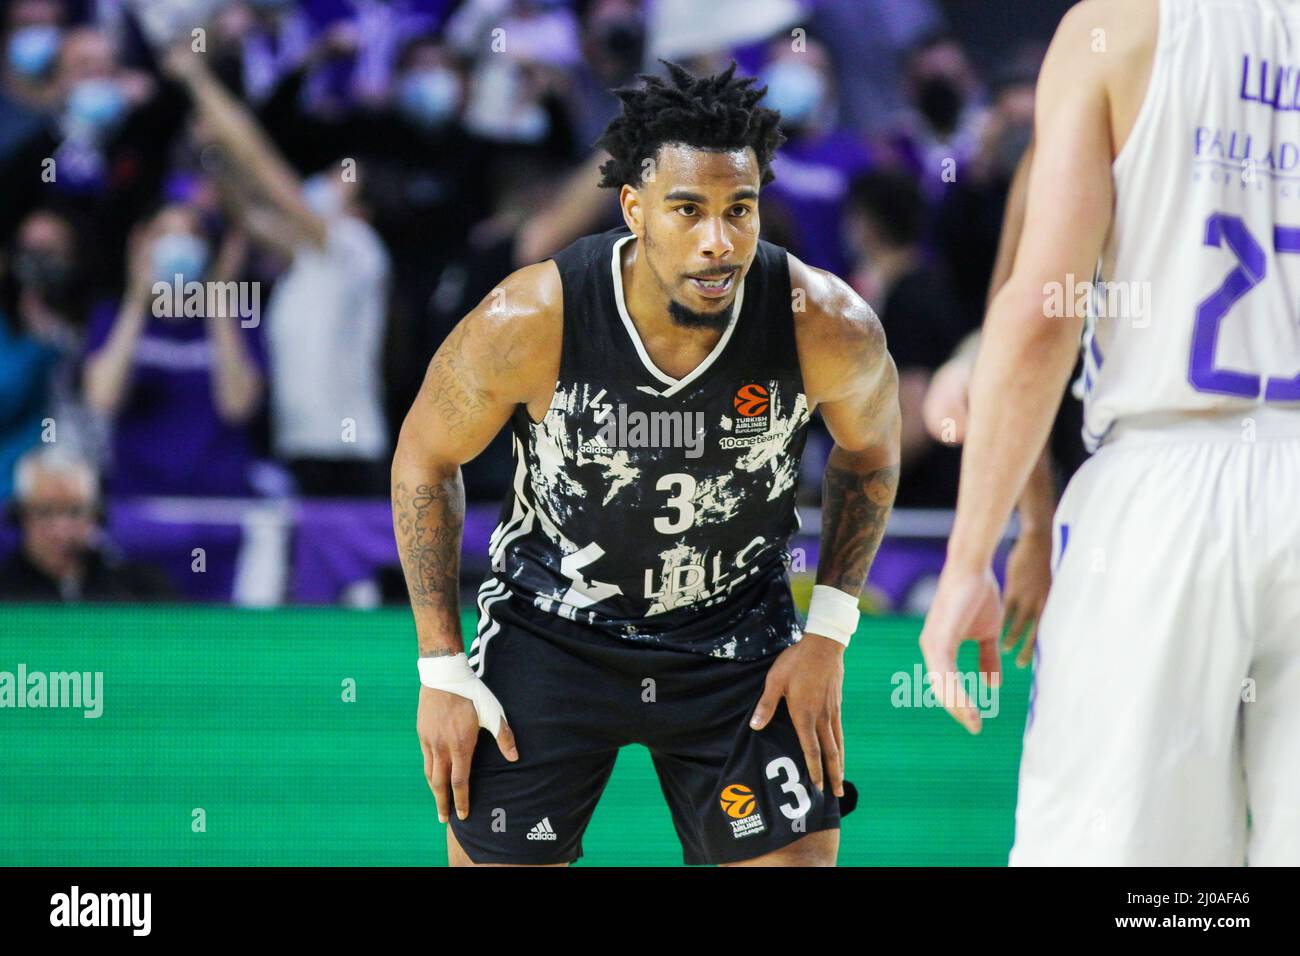 Madrid, Spain. 17th Mar, 2022. Chris Jones of Asvel Lyon-Villeurbanne during the Turkish Airlines Euroleague basketball match between Real Madrid and Asvel Lyon-Villeurbanne on march 17, 2022 at Wizink Center in Madrid, Spain Credit: Independent Photo Agency/Alamy Live Newss Stock Photo